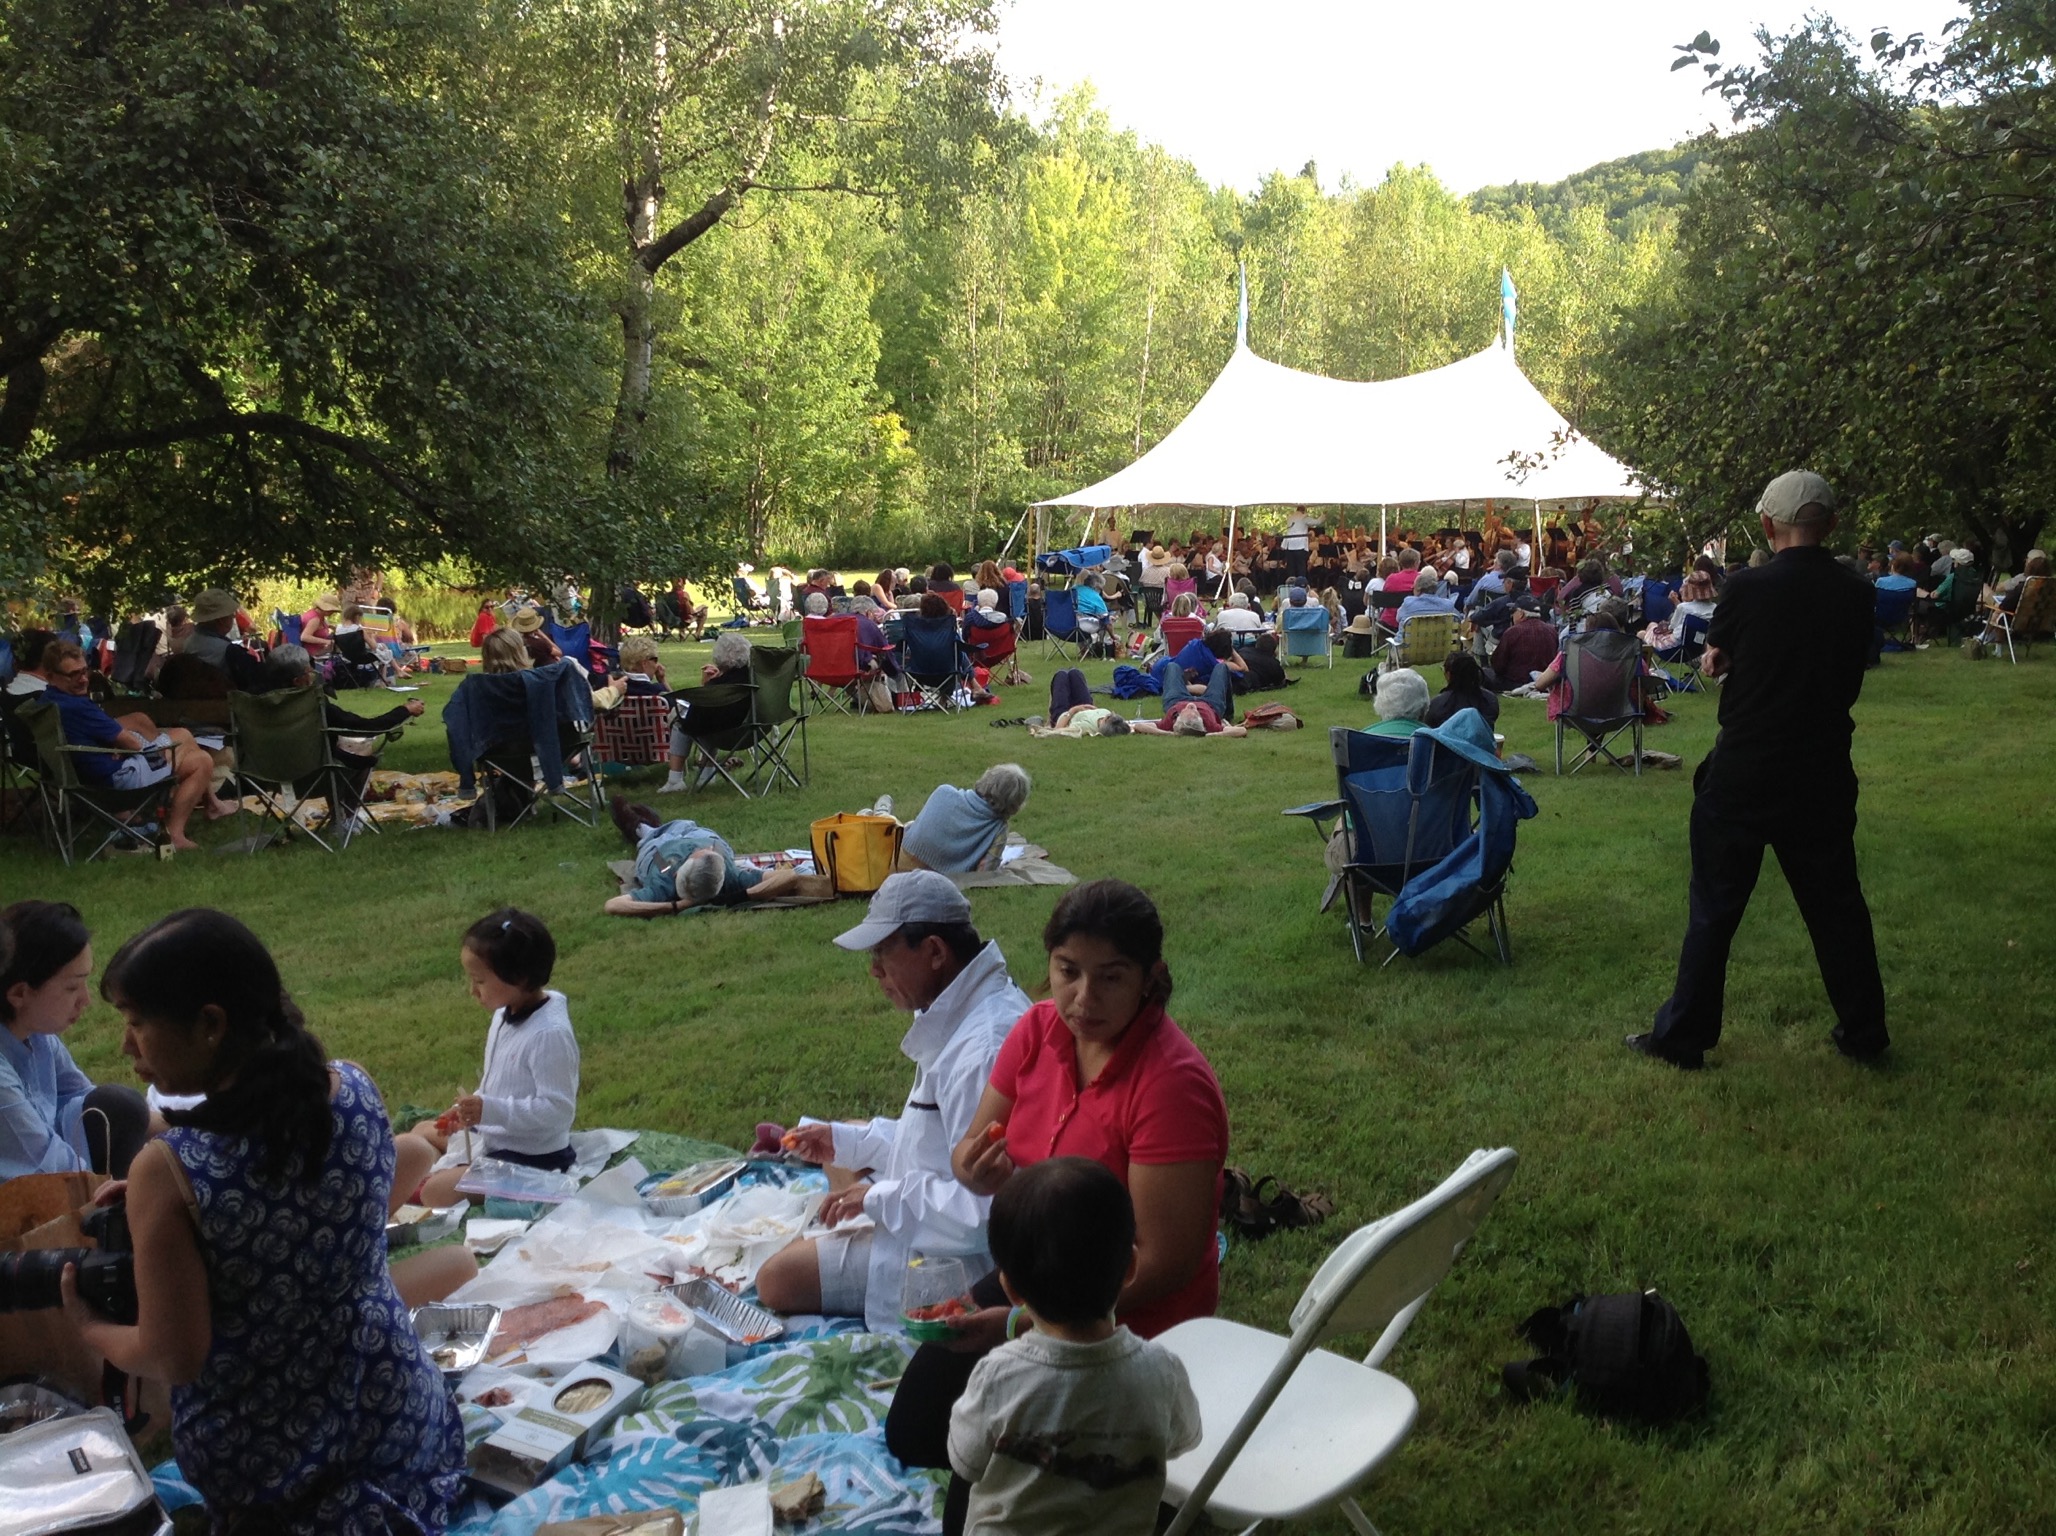 Audience picnicking on the lawn at Moose Meadow in front of the Vermont Philharmonic tent.